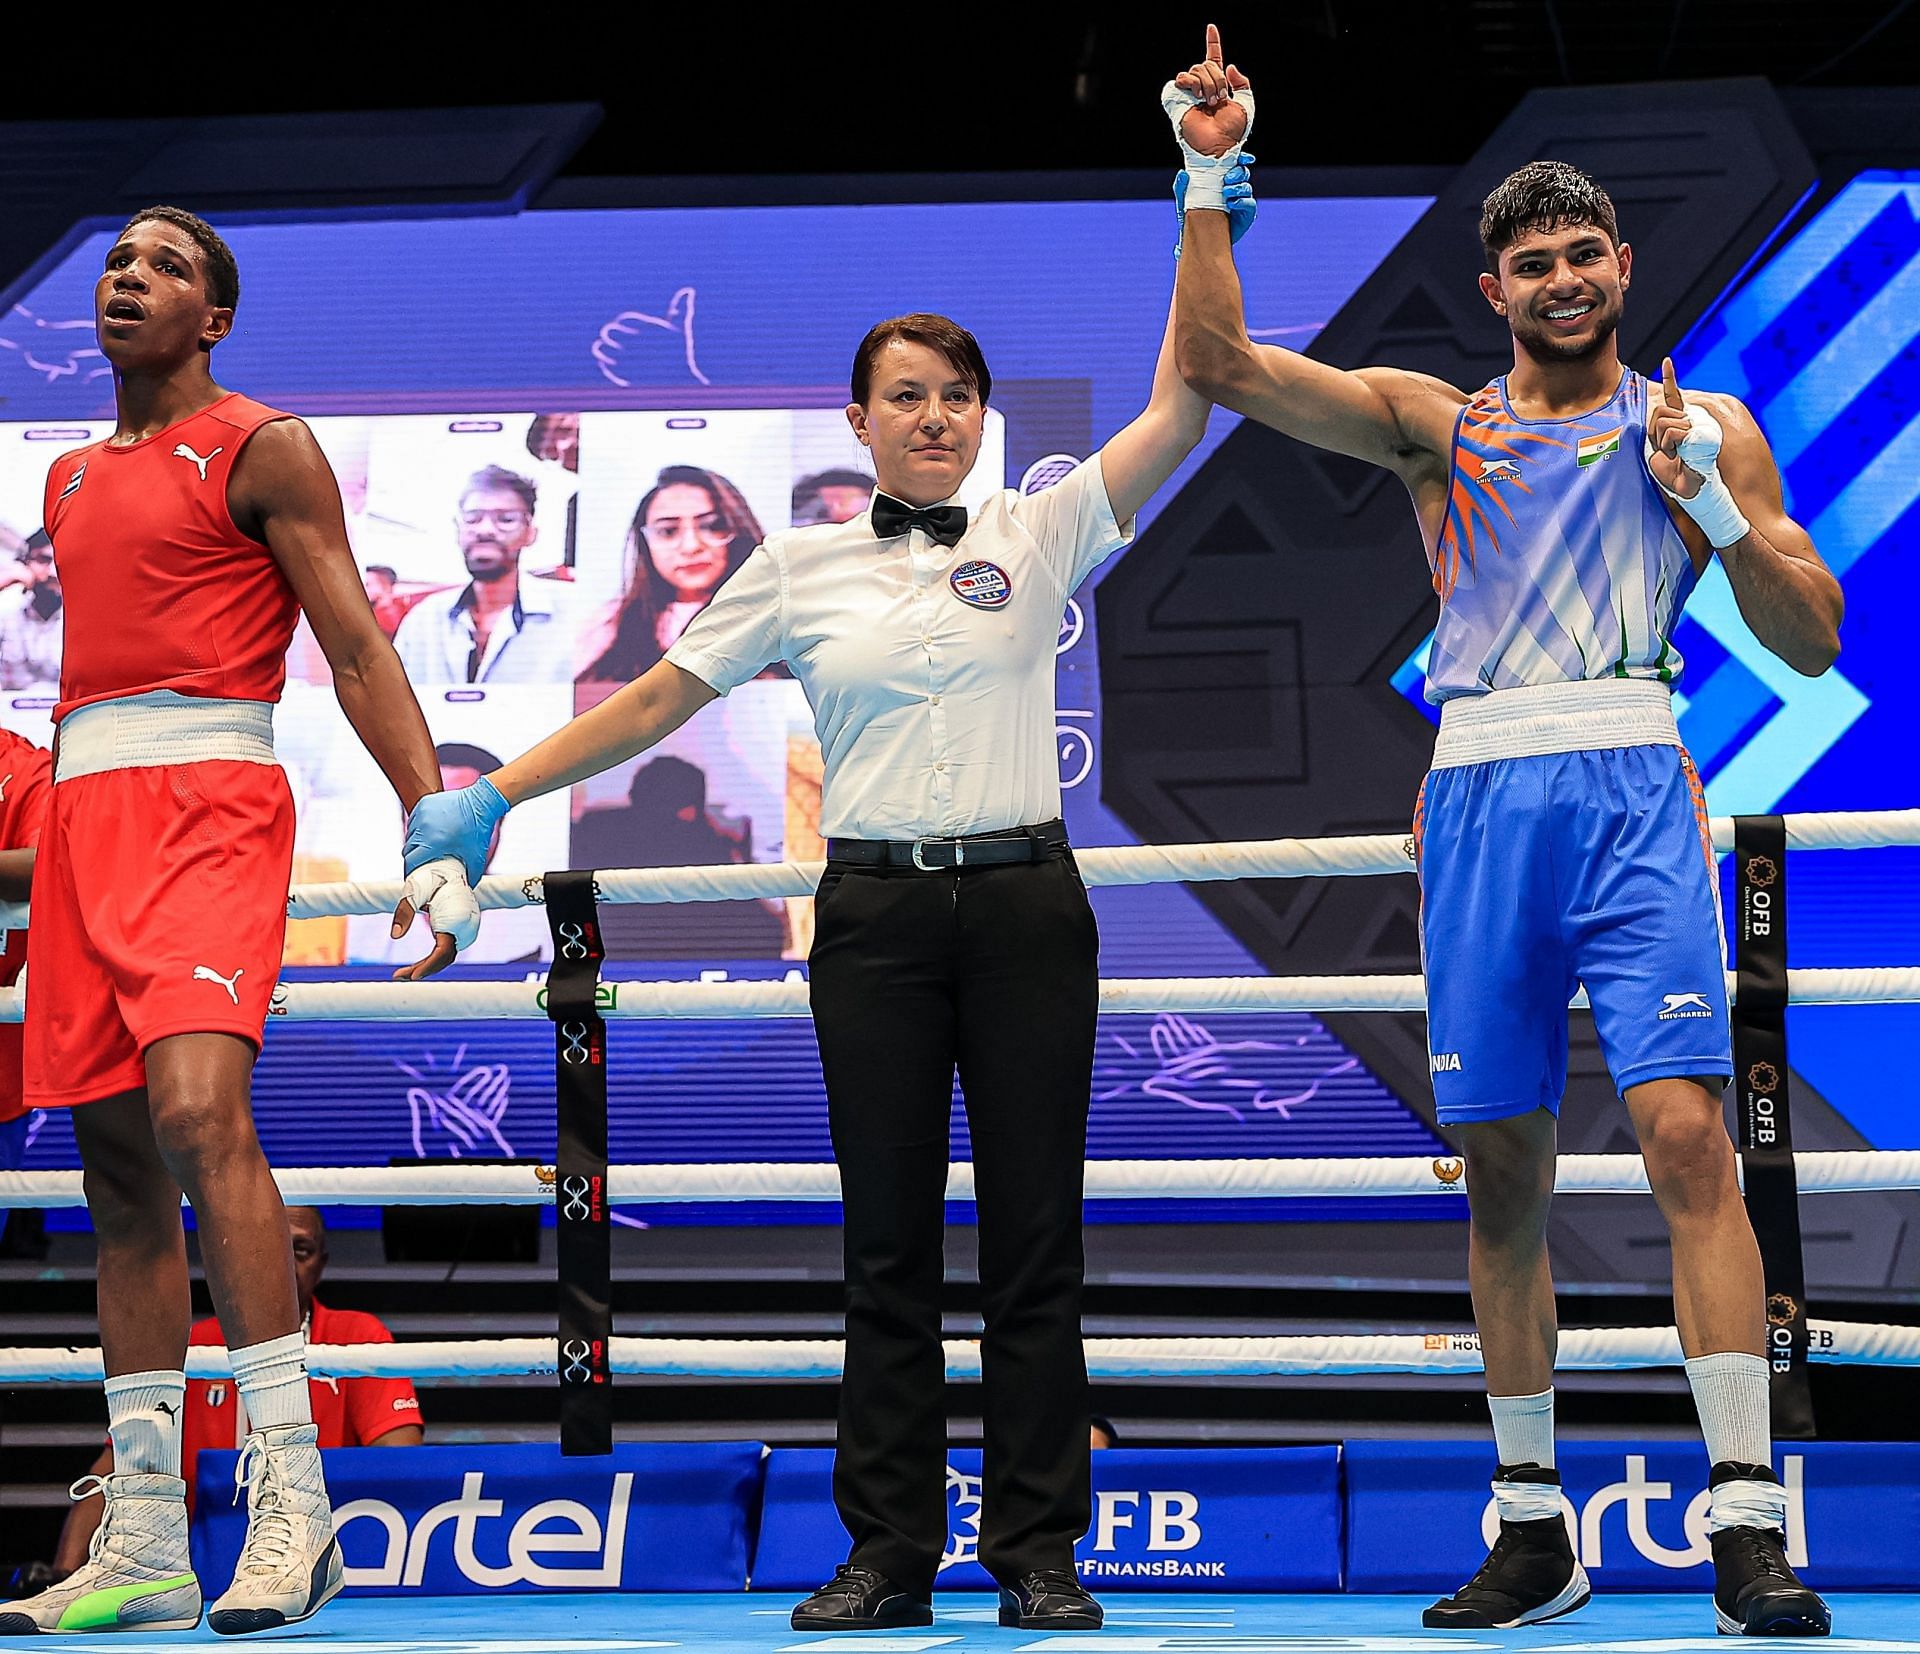 Nishant Dev after winning his quarter-final bout on Wednesday (Image Courtesy: BFI)